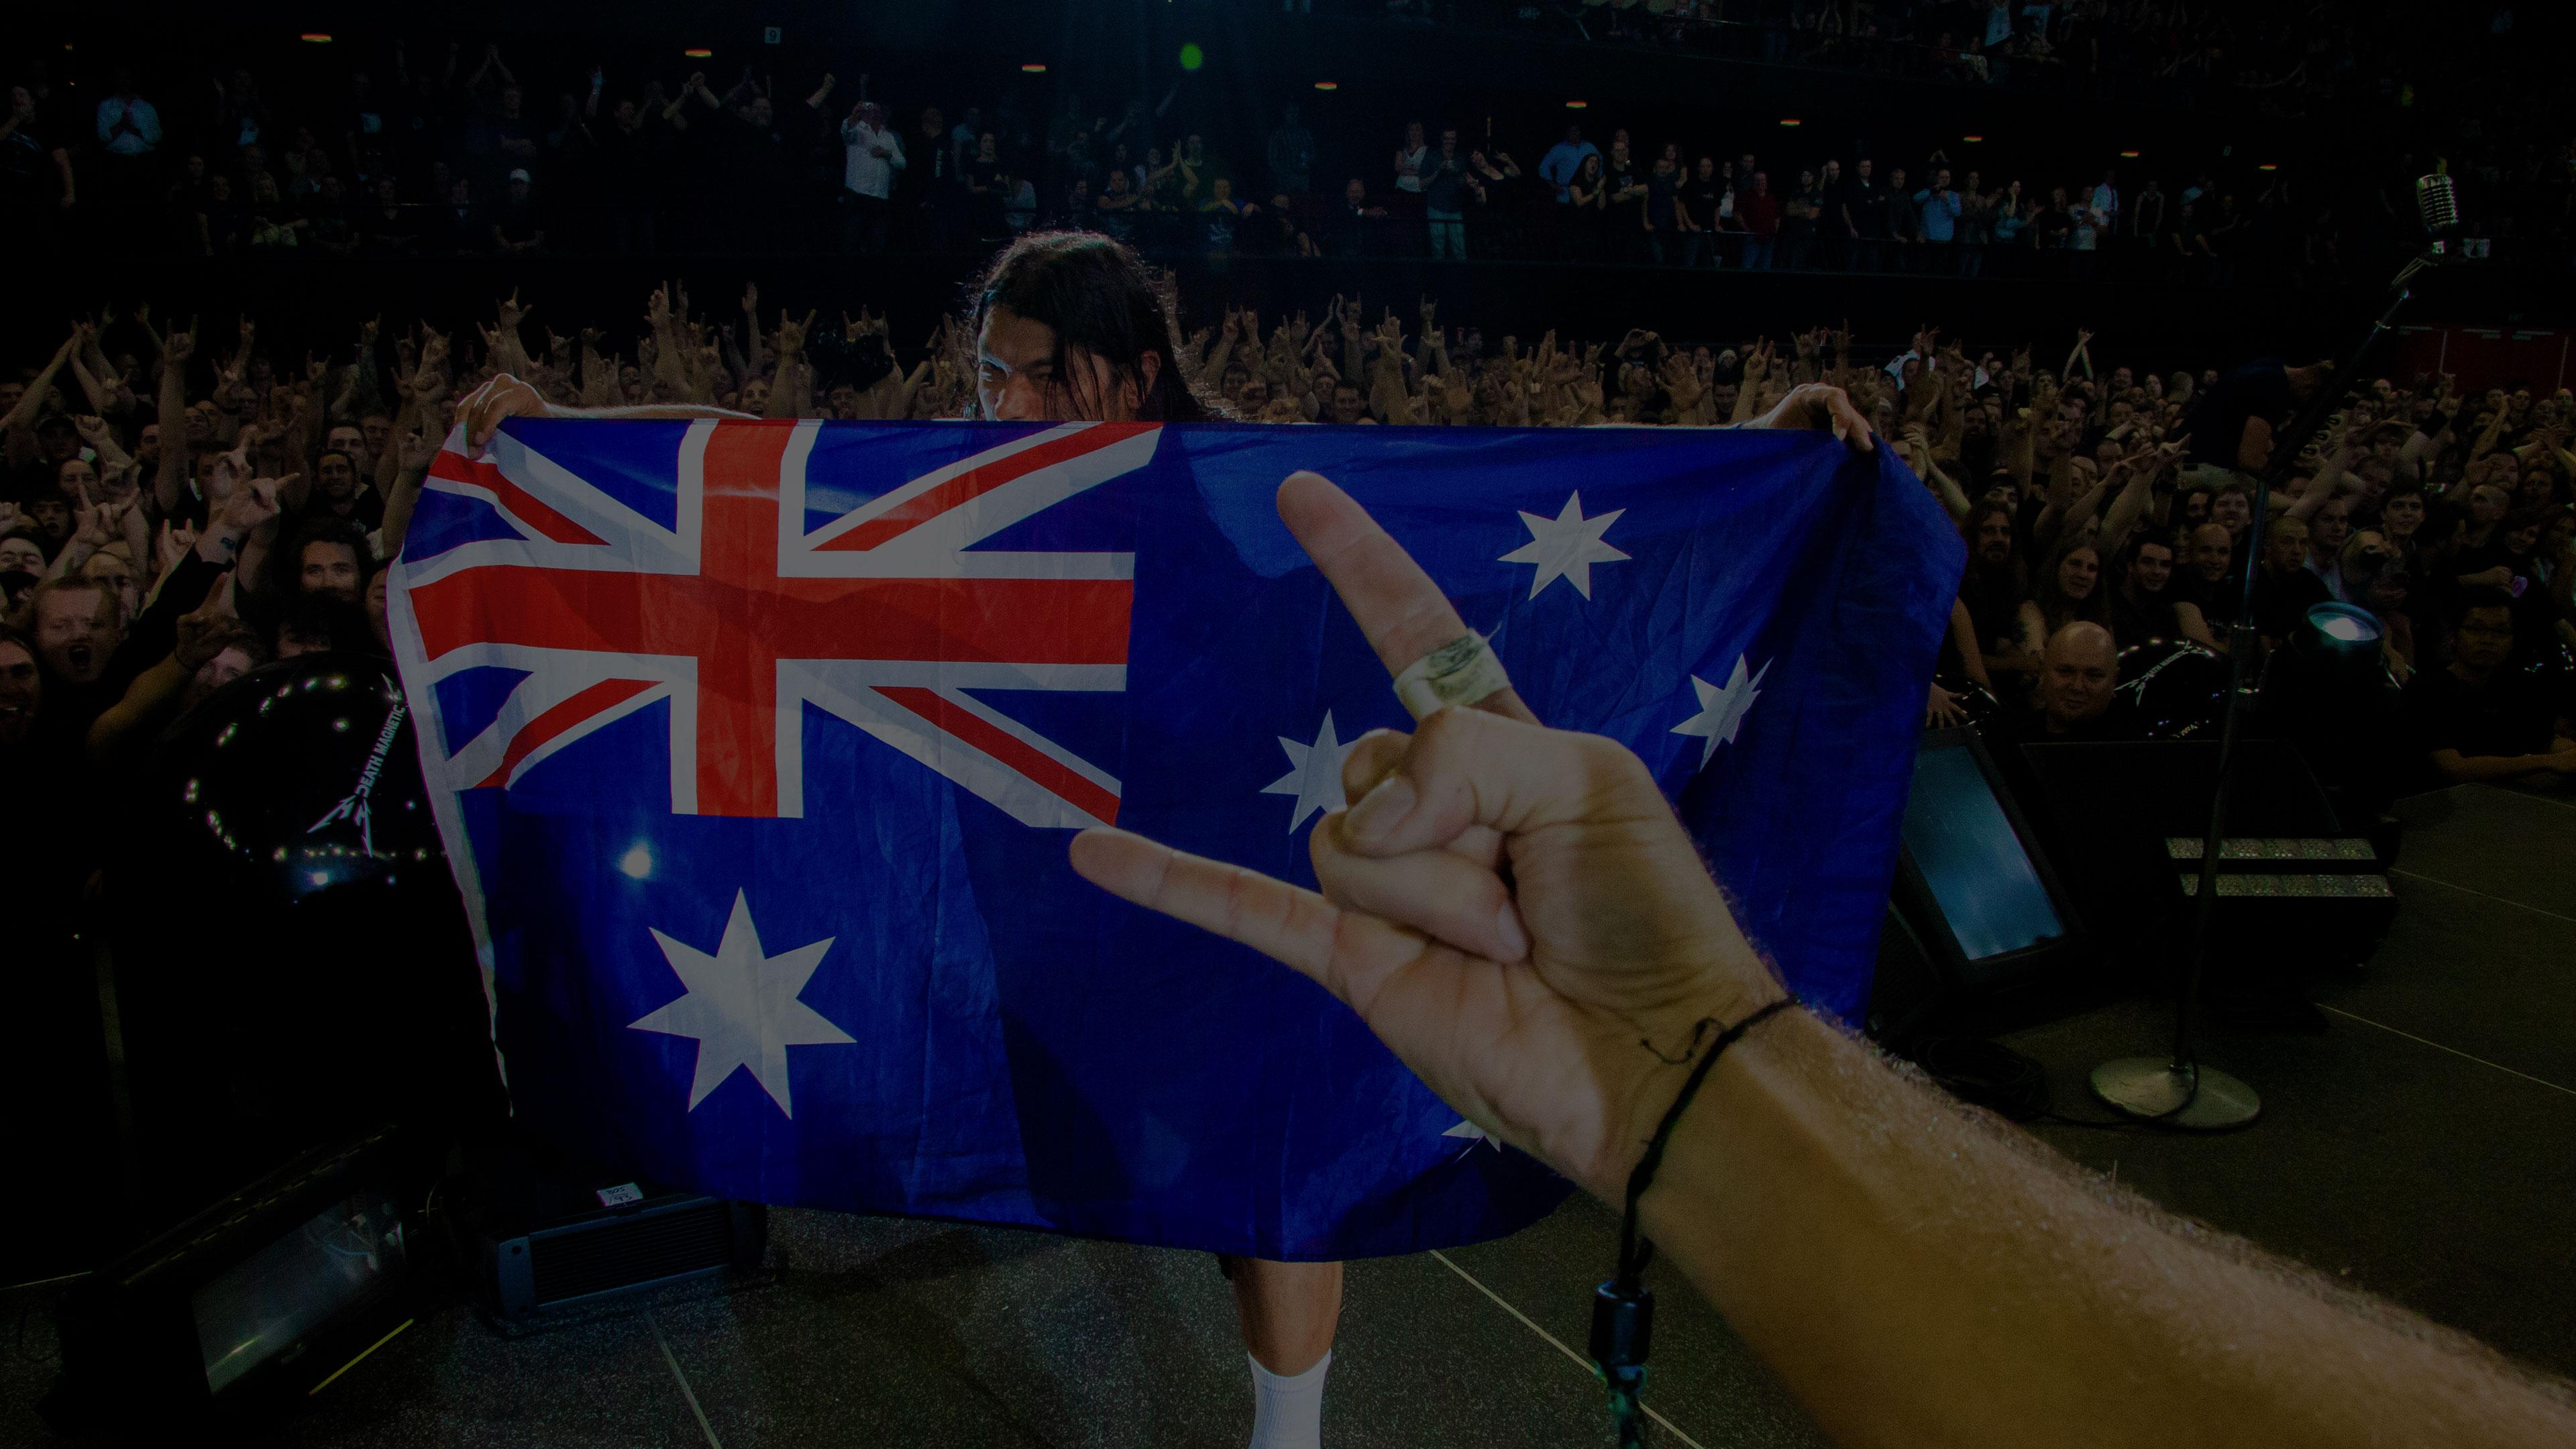 Banner Image for the photo gallery from the gig in Adelaide, Australia shot on November 15, 2010